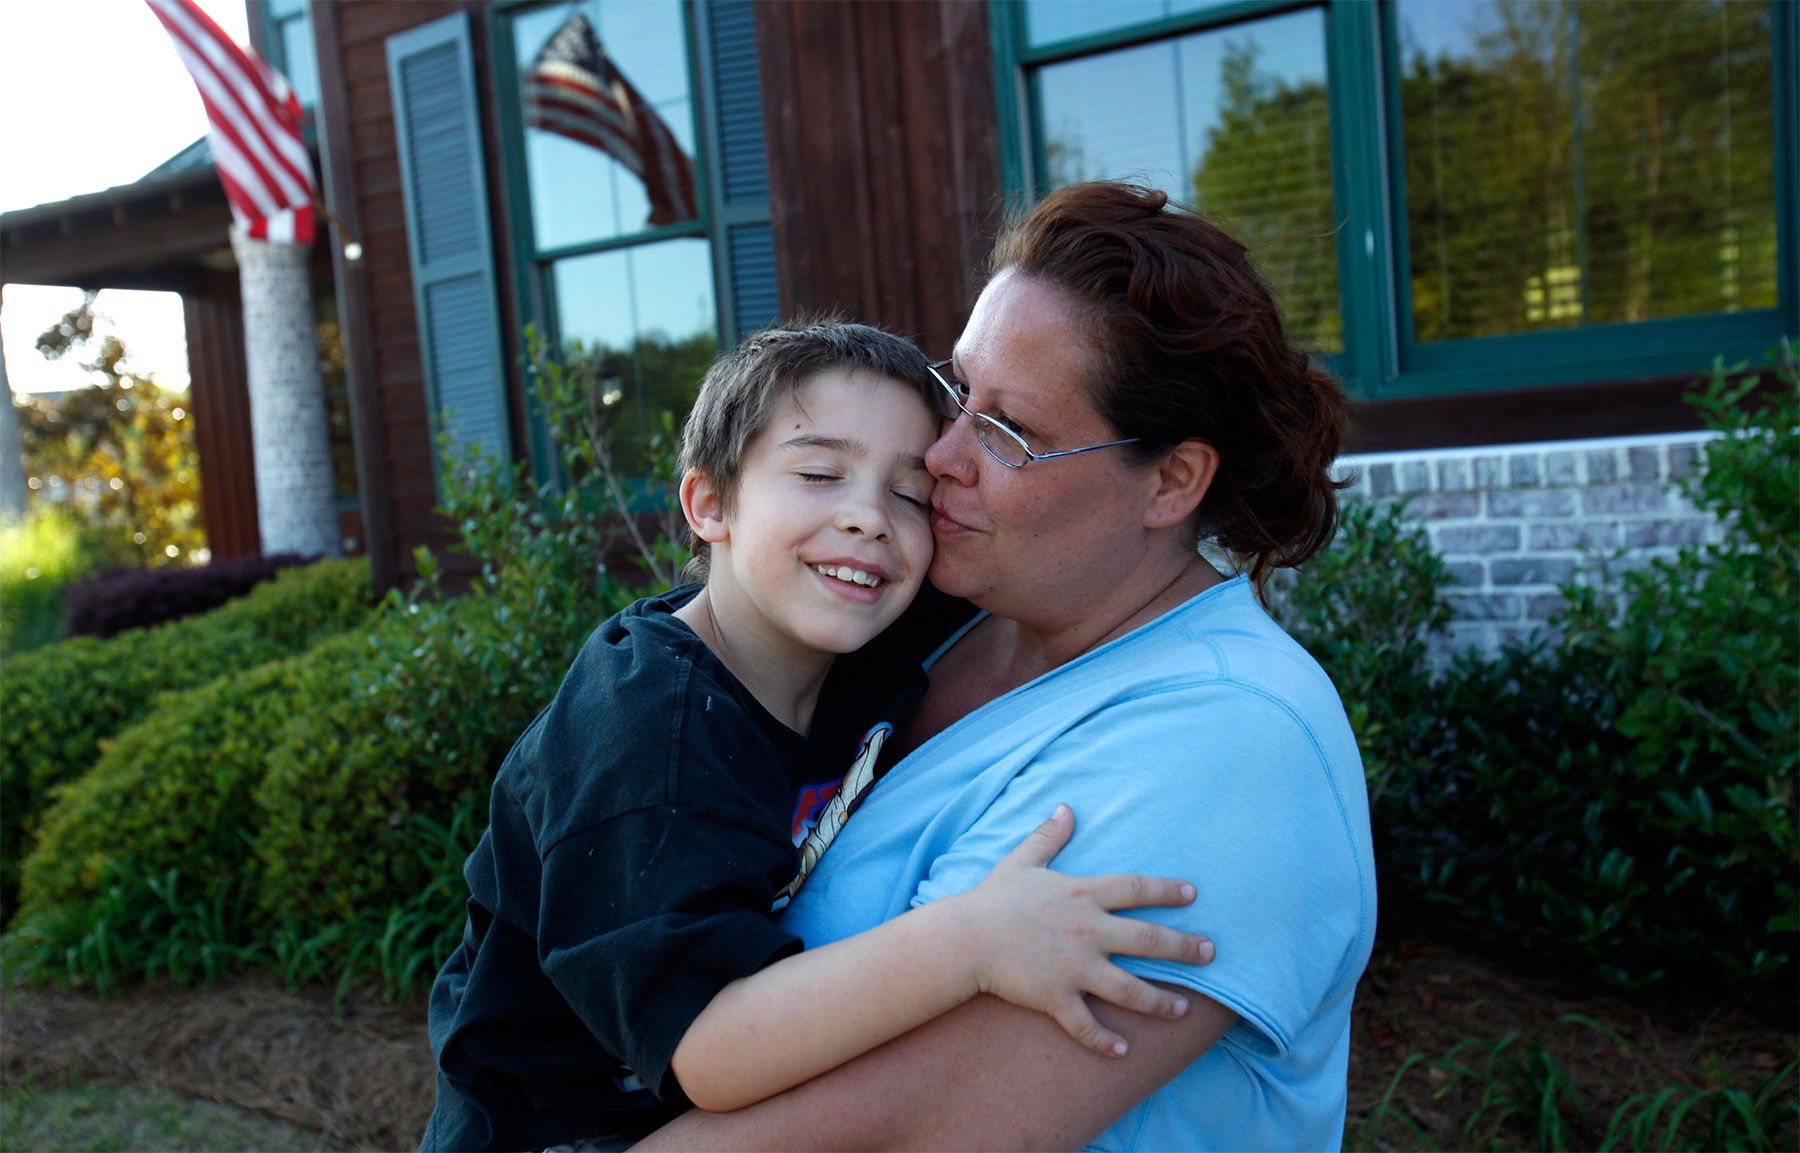 Six-year-old Jacob Cushman hugs his mother Cathryn Monday at the Residents' Club in North Myrtle Beach after searching for donated goods. The Cushman's rental home on Club Course Dr. in Barefoot Resort was a complete loss after the fire. {quote}People have been angels to us,{quote} said Cathryn while standing outside the clubhouse where a donation center has been started for victims of the fire. Still, with donations of toys for Jacob and his little brother Matthew, all the family’s household items were destroyed in the fire. The family had only moved into the house in Barefoot Resort for one week.